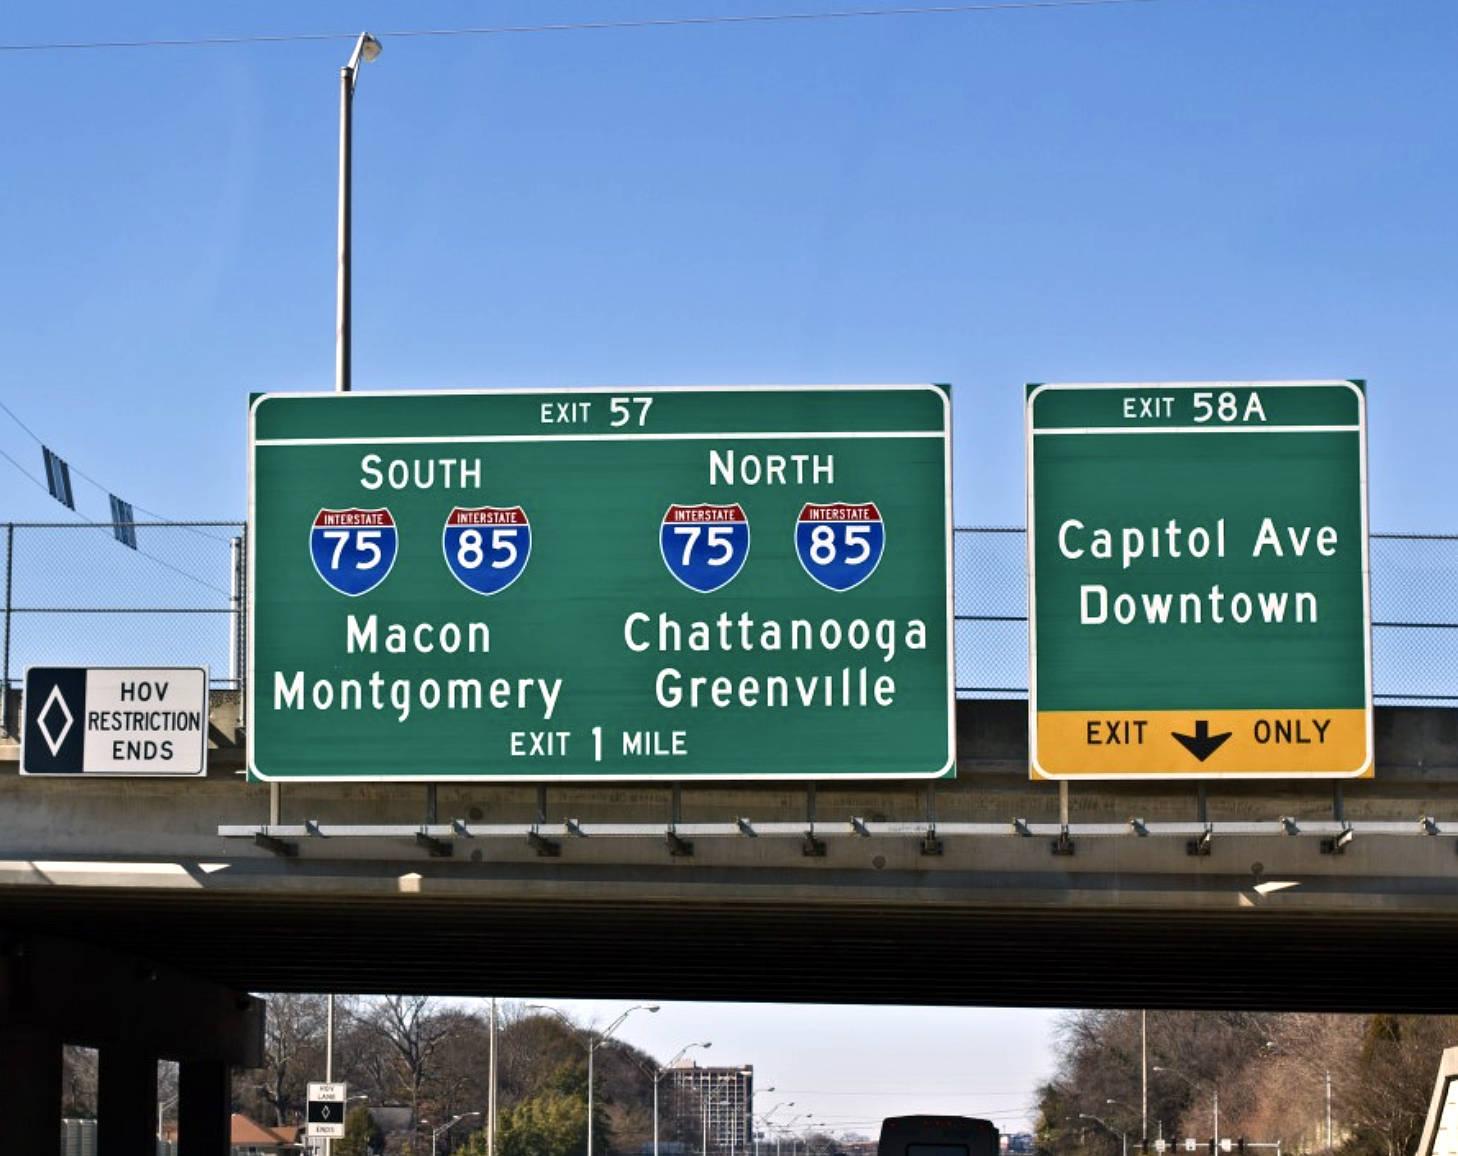 Most states--except New York--the mile markers line up with the exit numbers.